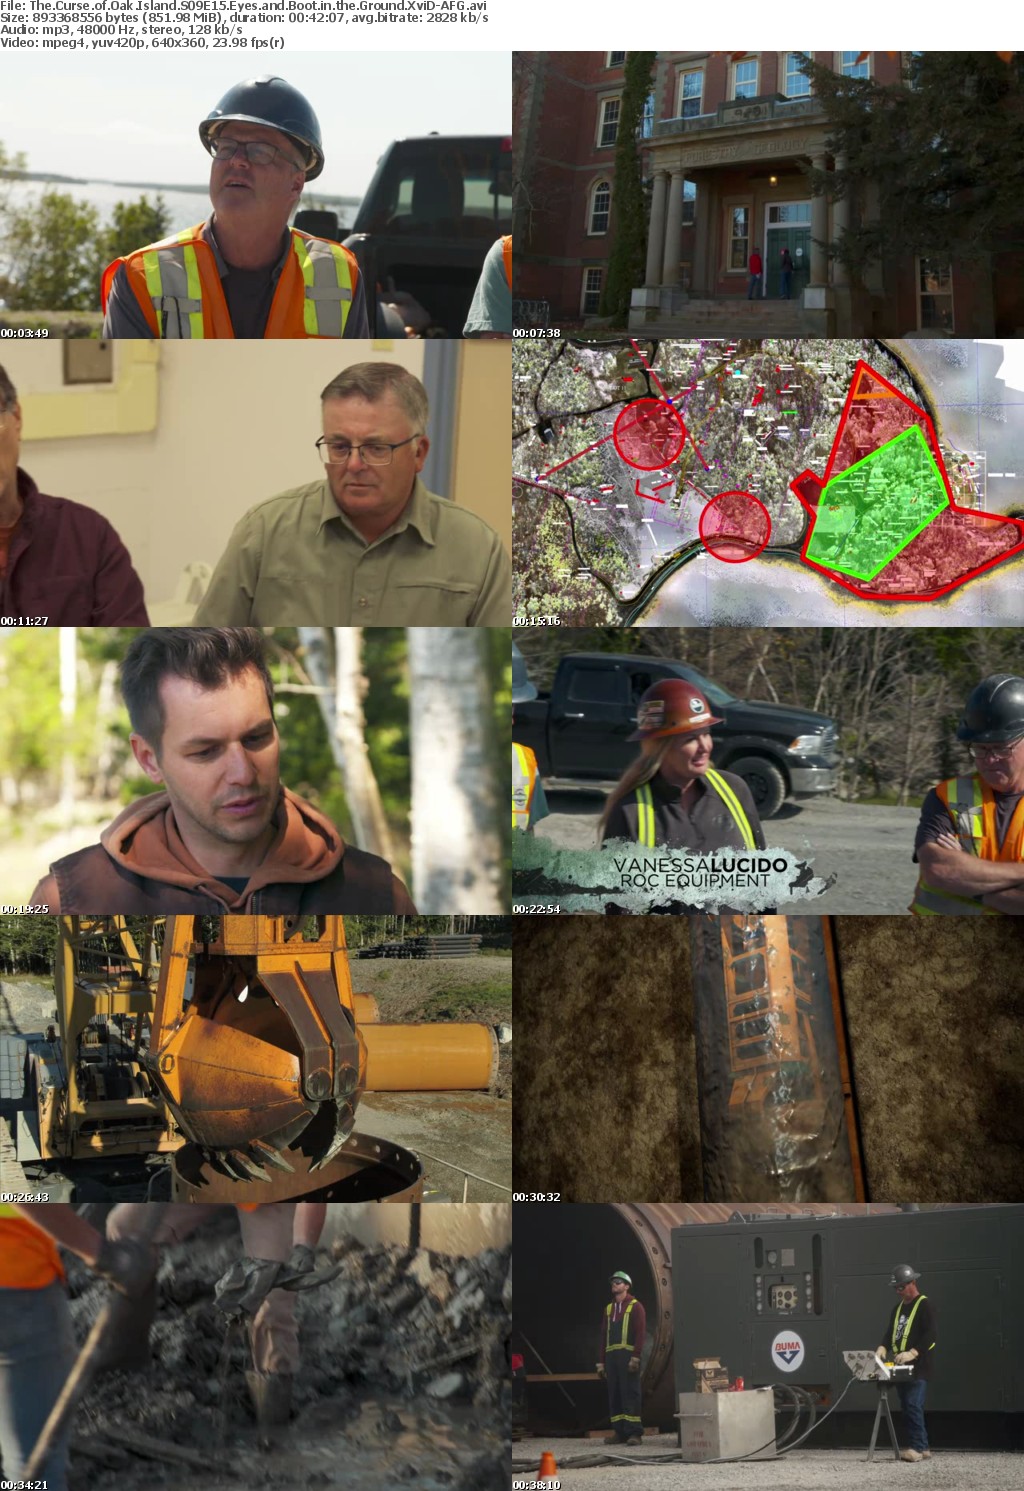 The Curse of Oak Island S09E15 Eyes and Boot in the Ground XviD-AFG